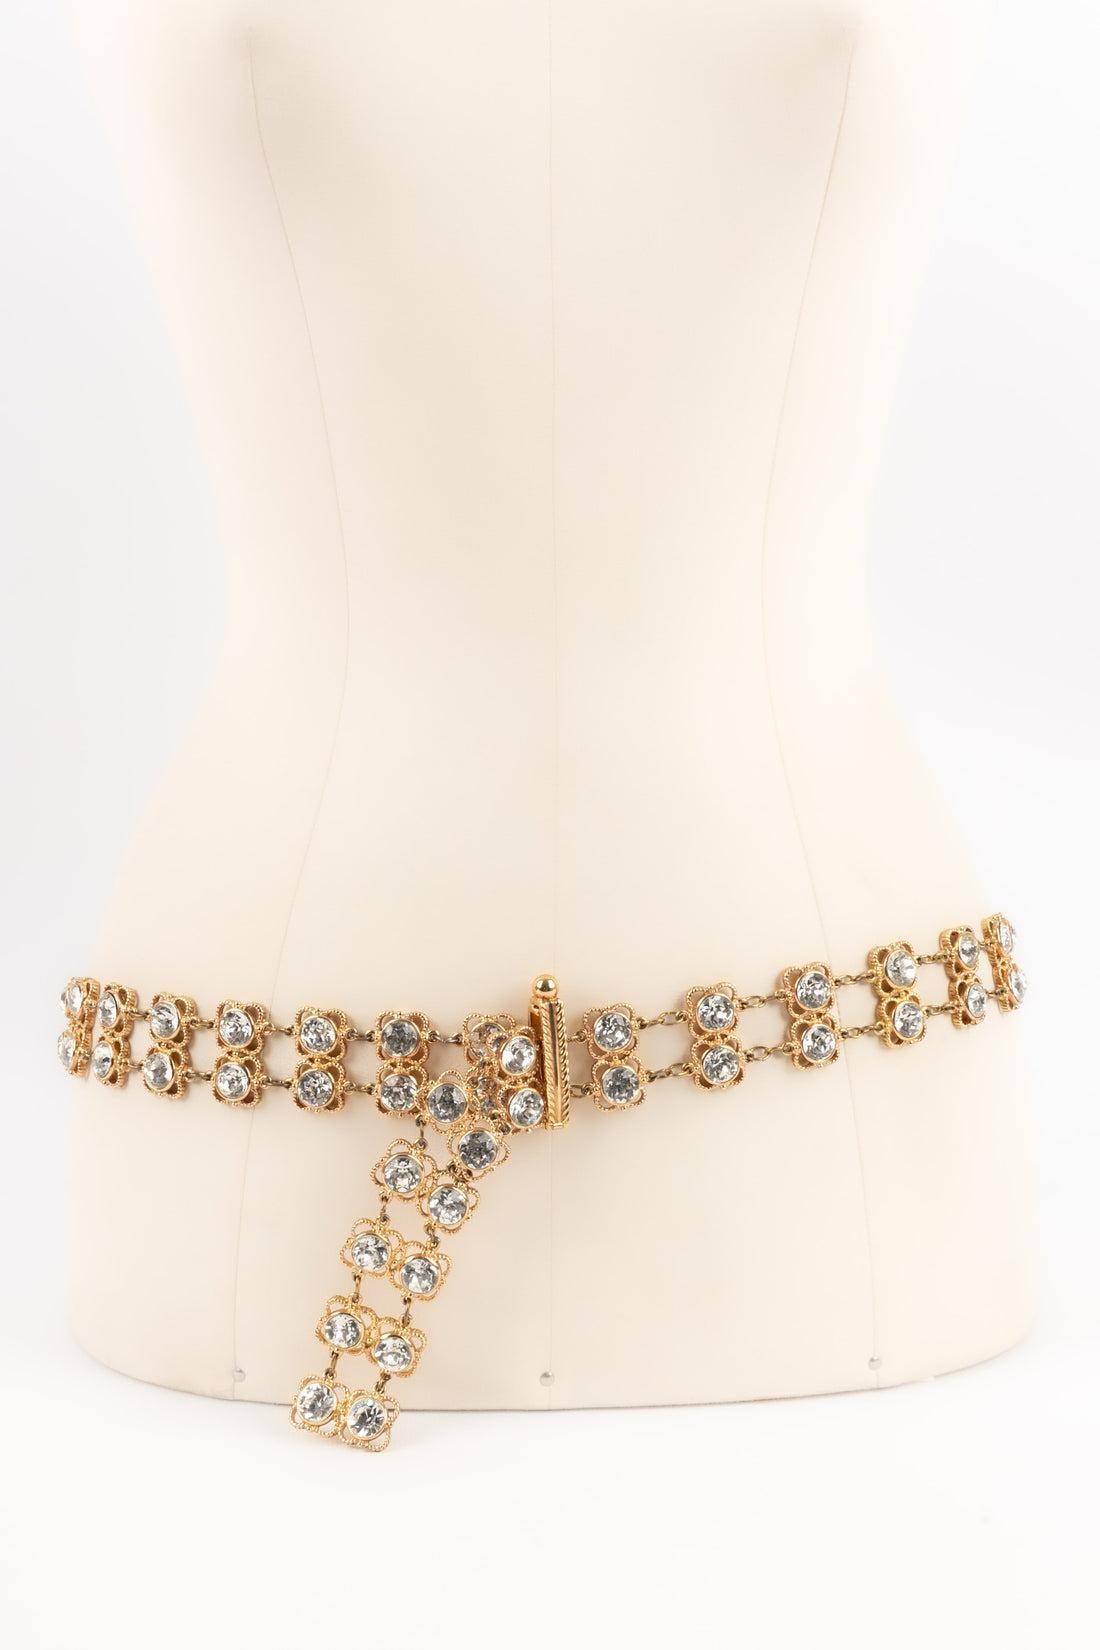 Dior - (Made in Germany) Articulated jewelry belt in golden metal and rhinestones.

Additional information:
Condition: Very good condition
Dimensions: Length: 98 cm - Width: 3 cm

Seller Reference: ACC37